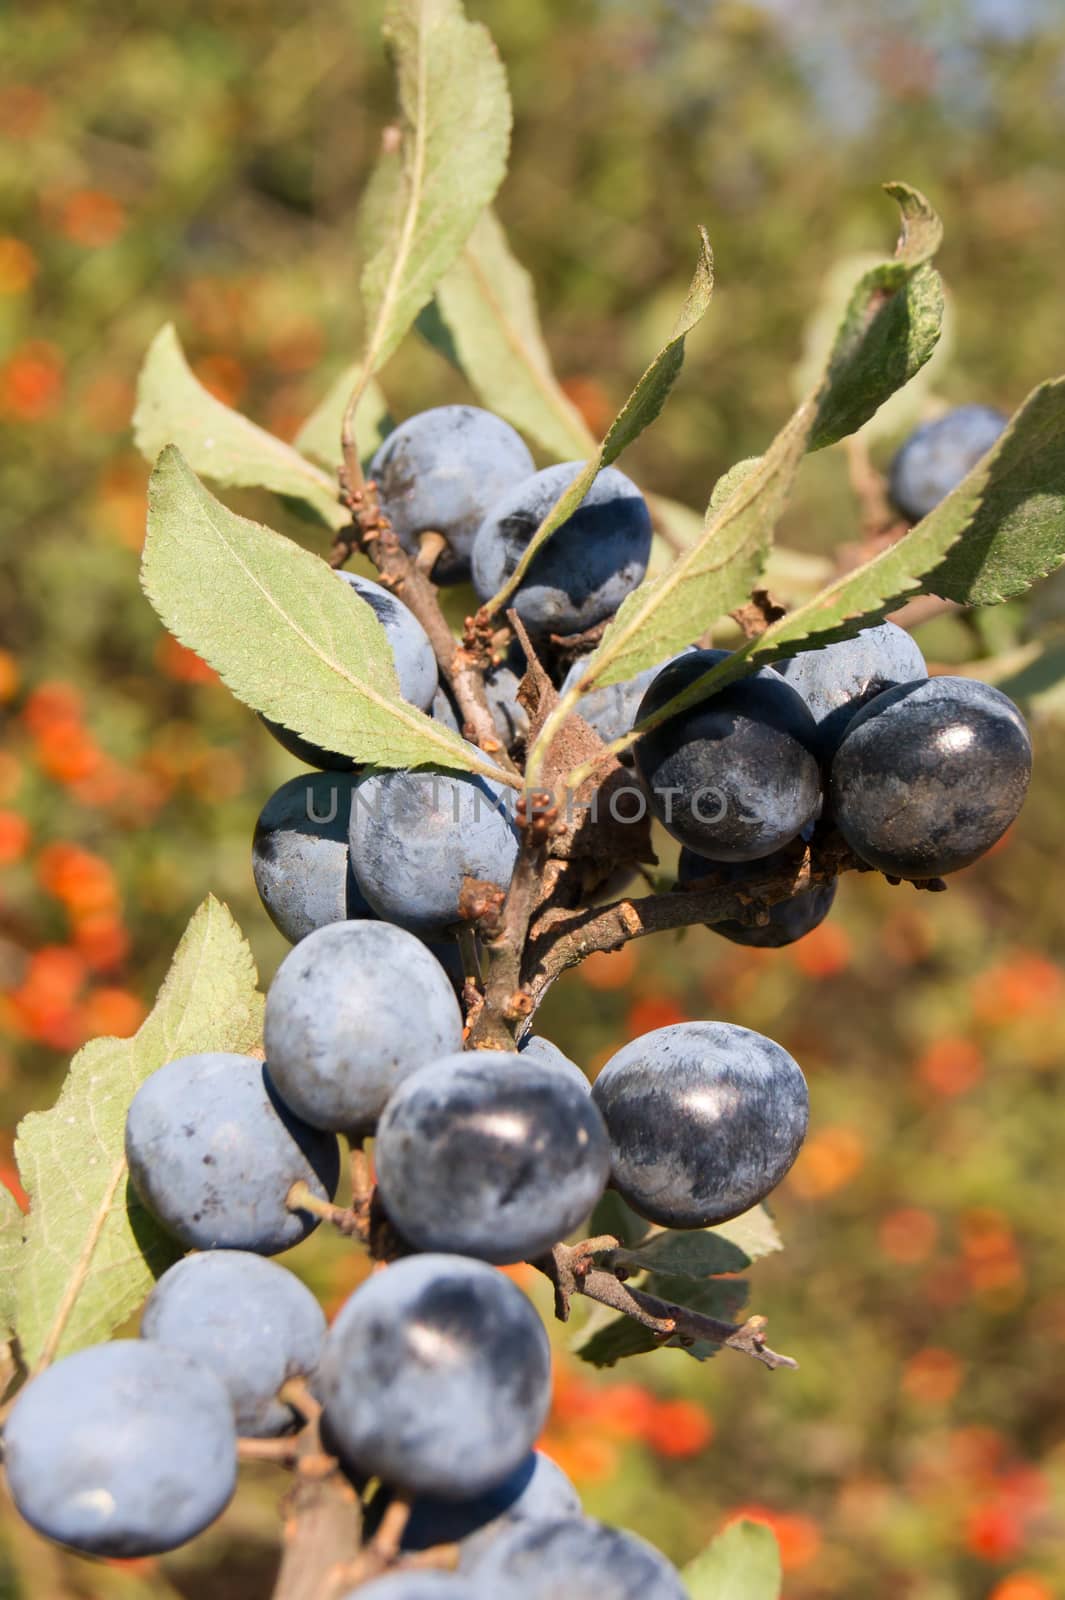 The blue sloe (Prunus spinosa) fruit of the autumn forest.